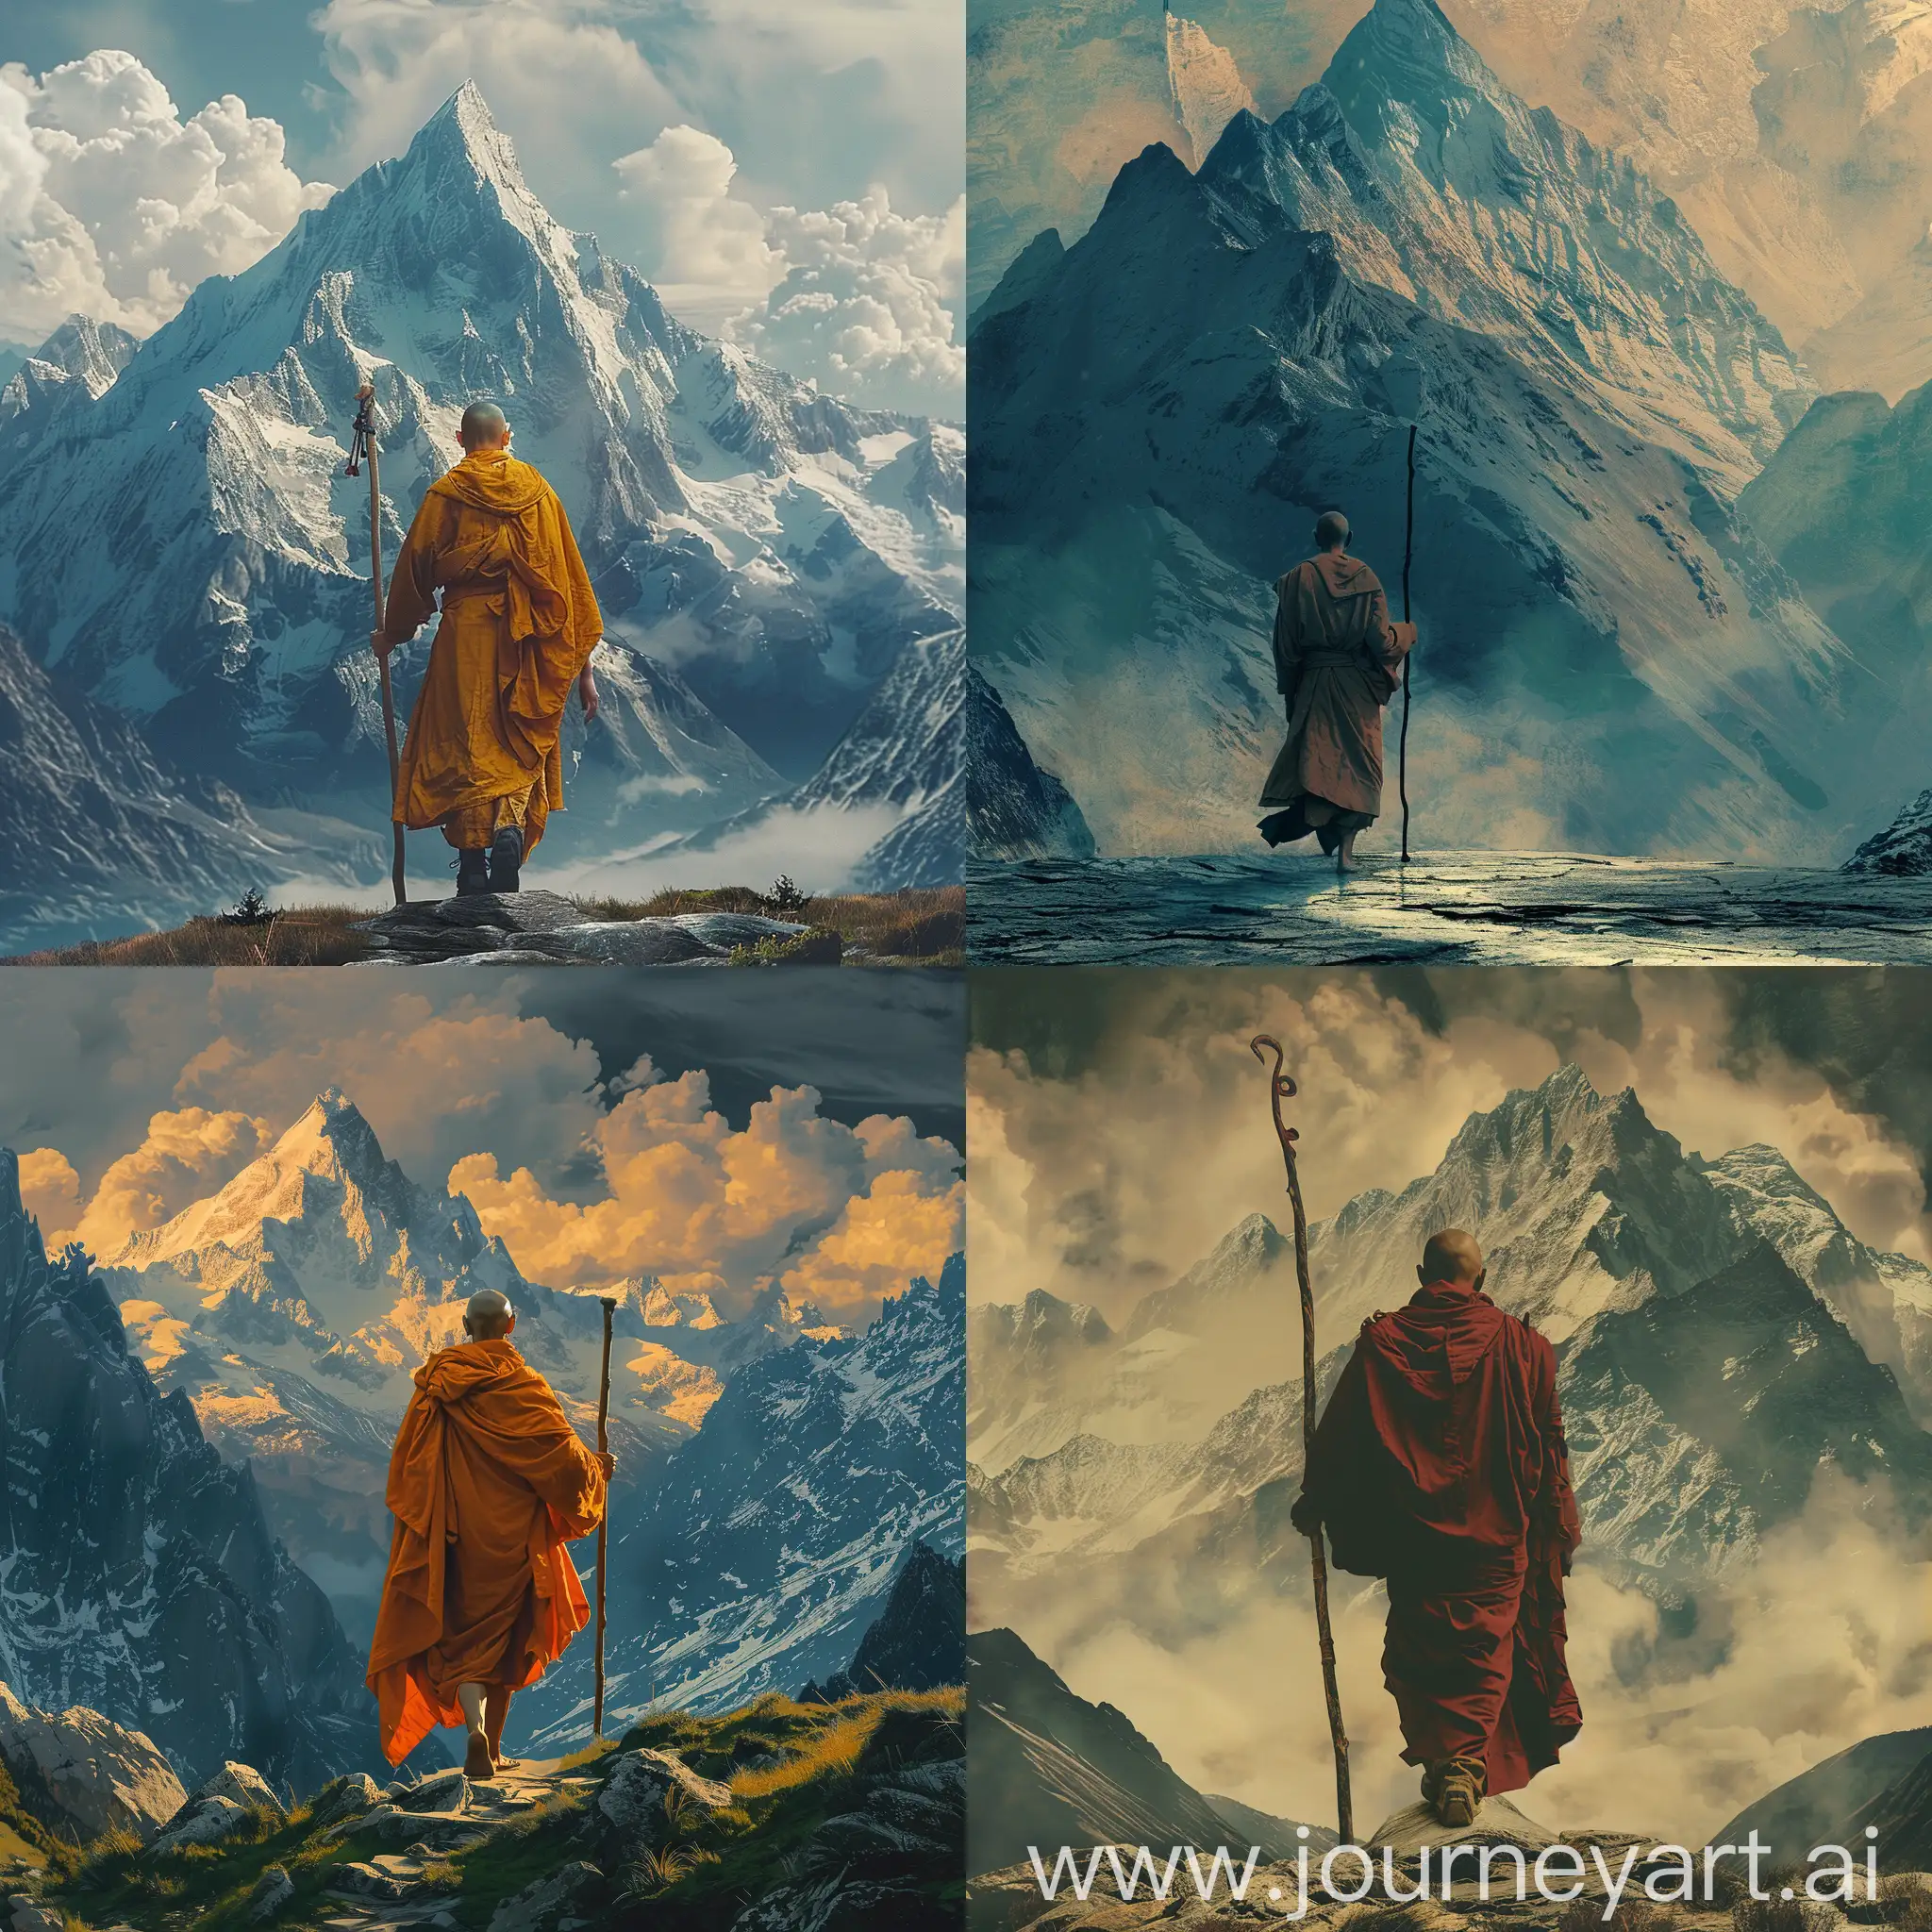 A Monk, Traveling, Mountains, Staff in Hand, Aesthetic